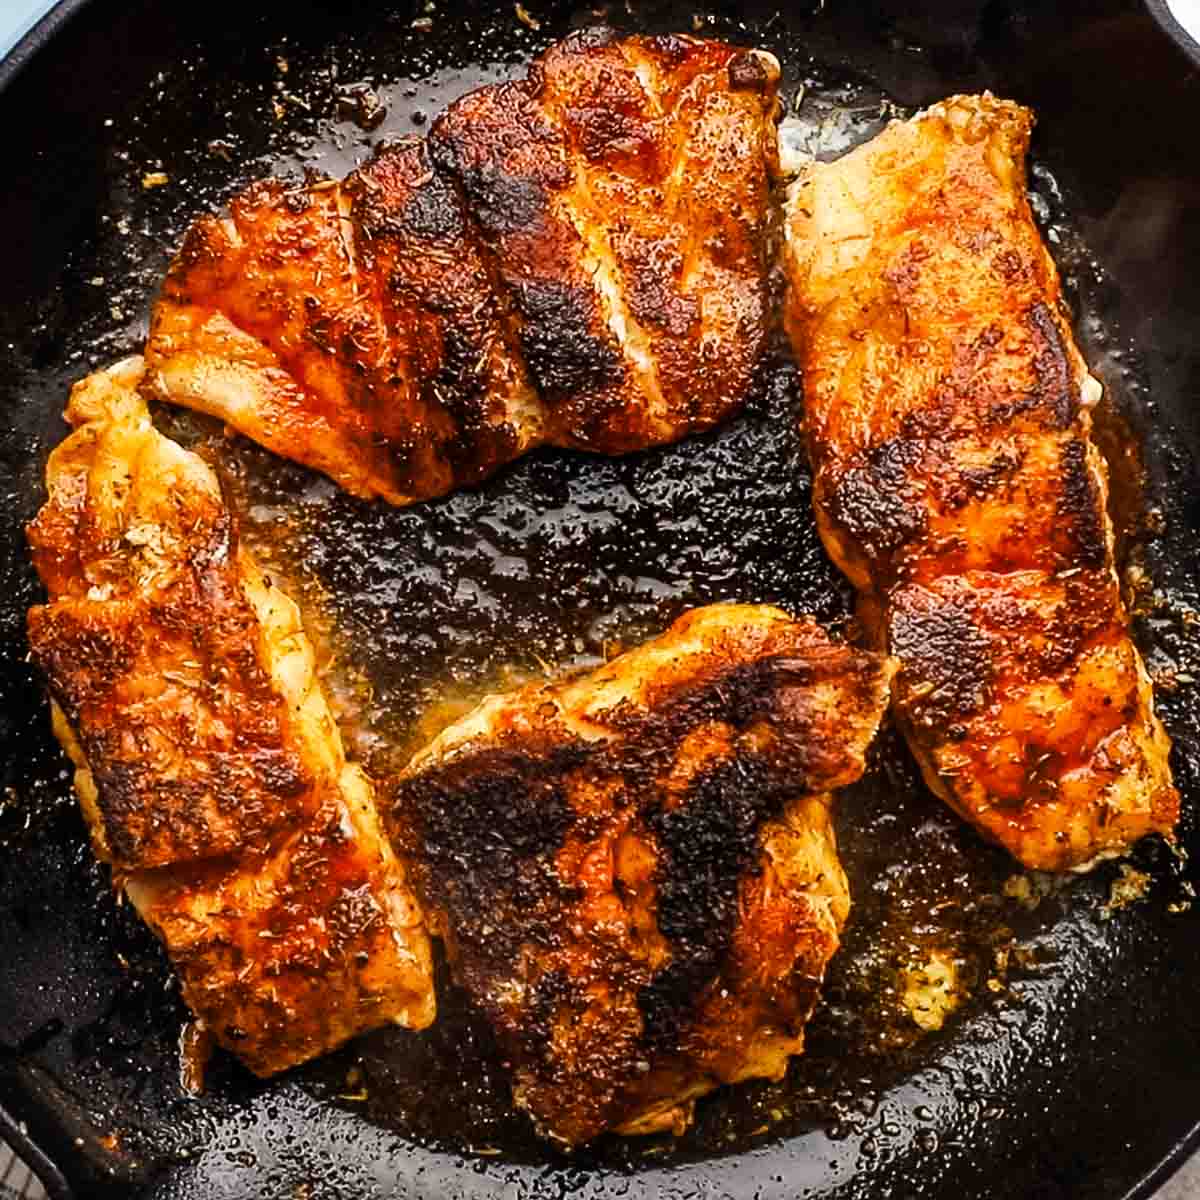 4 blackened fish pieces in a cast iron pan.